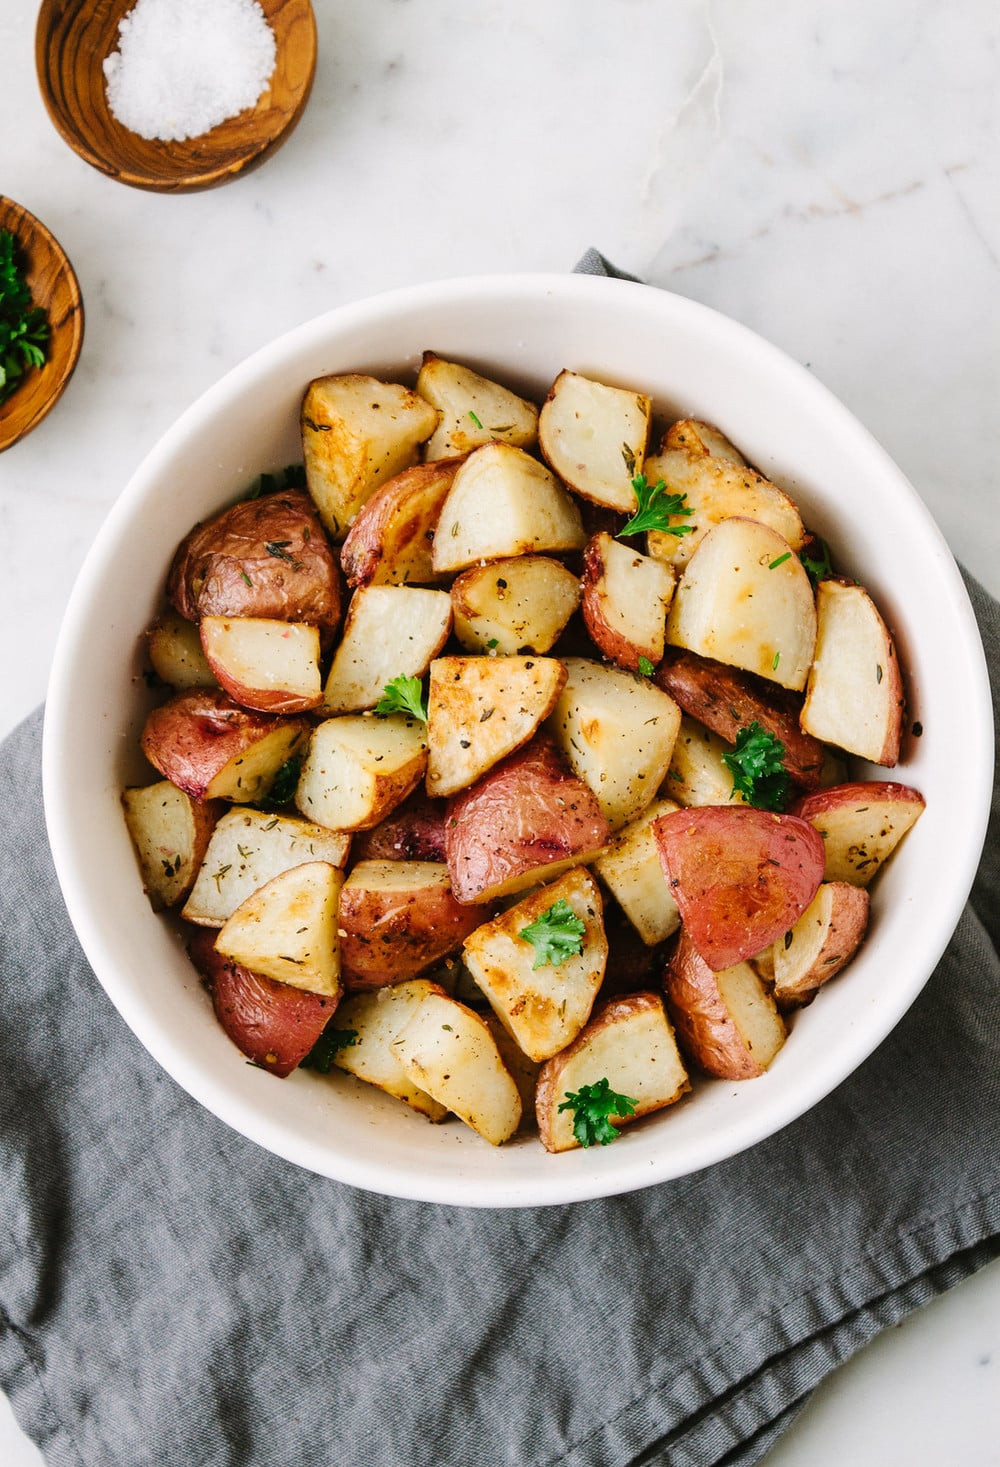 Oven Roasted Red Potatoes
 EASY OVEN ROASTED RED POTATOES THE SIMPLE VEGANISTA